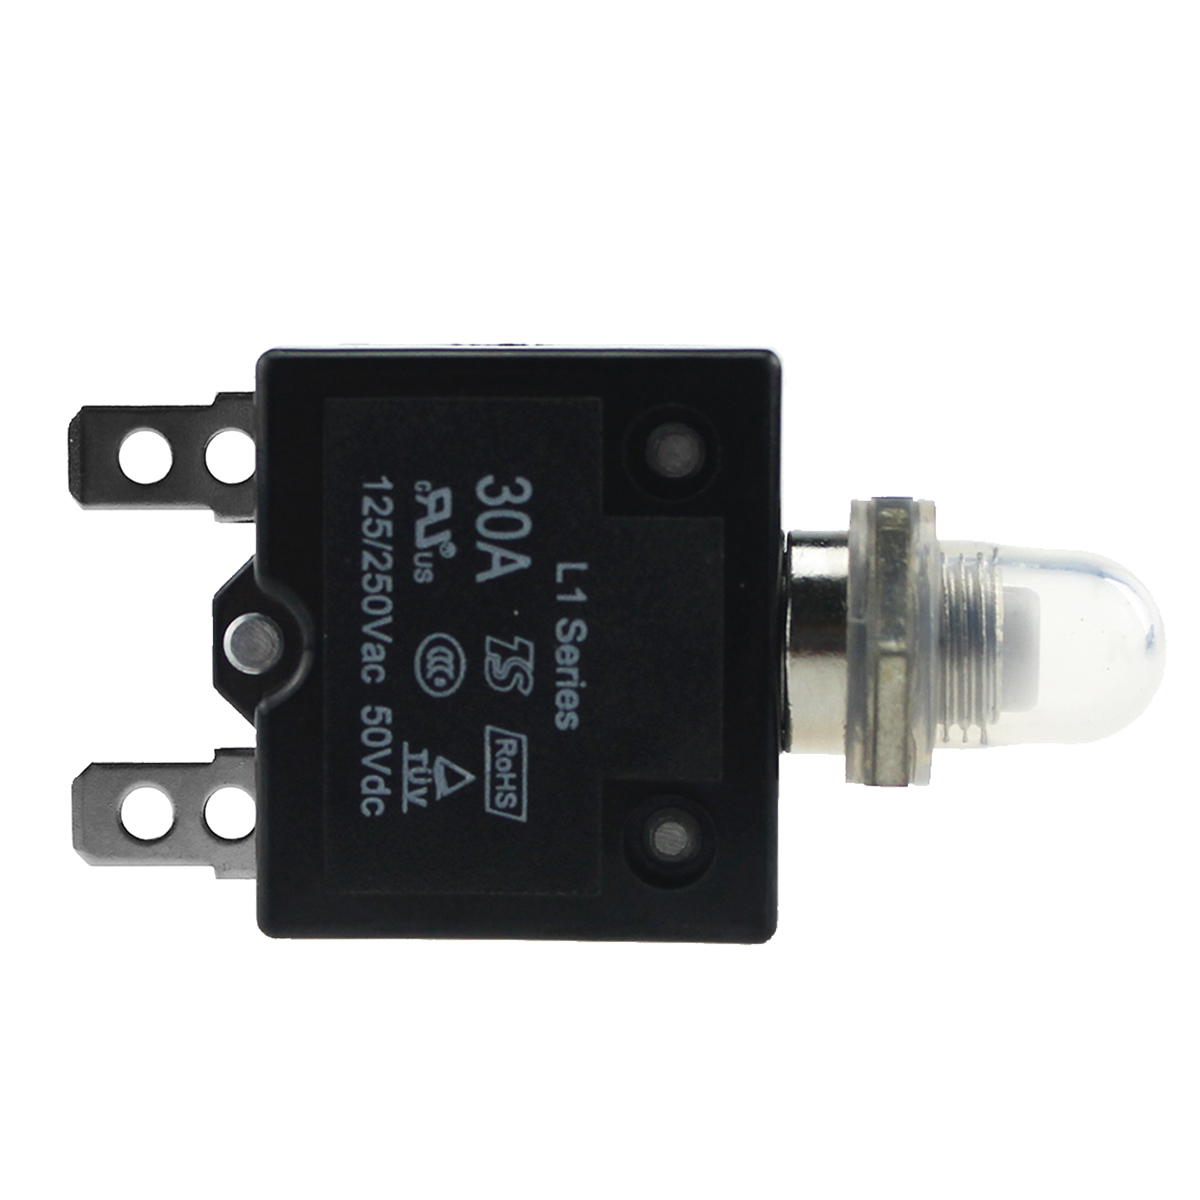 30 AMP PUSHBUTTON THERMAL CIRCUIT BREAKER RESET SWITCH